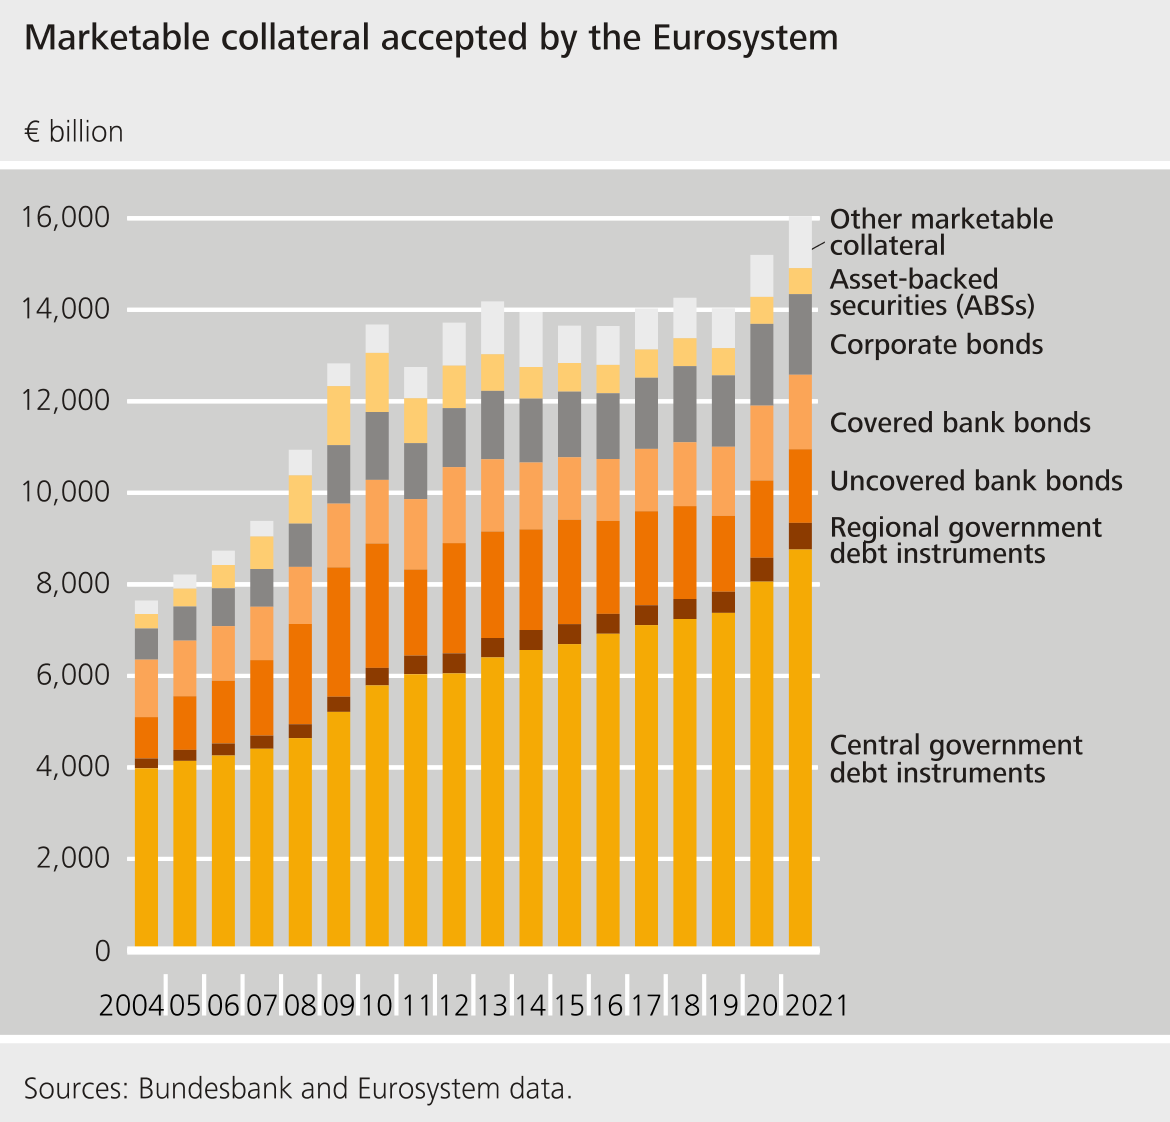 Marketable collateral accepted by the Eurosystem